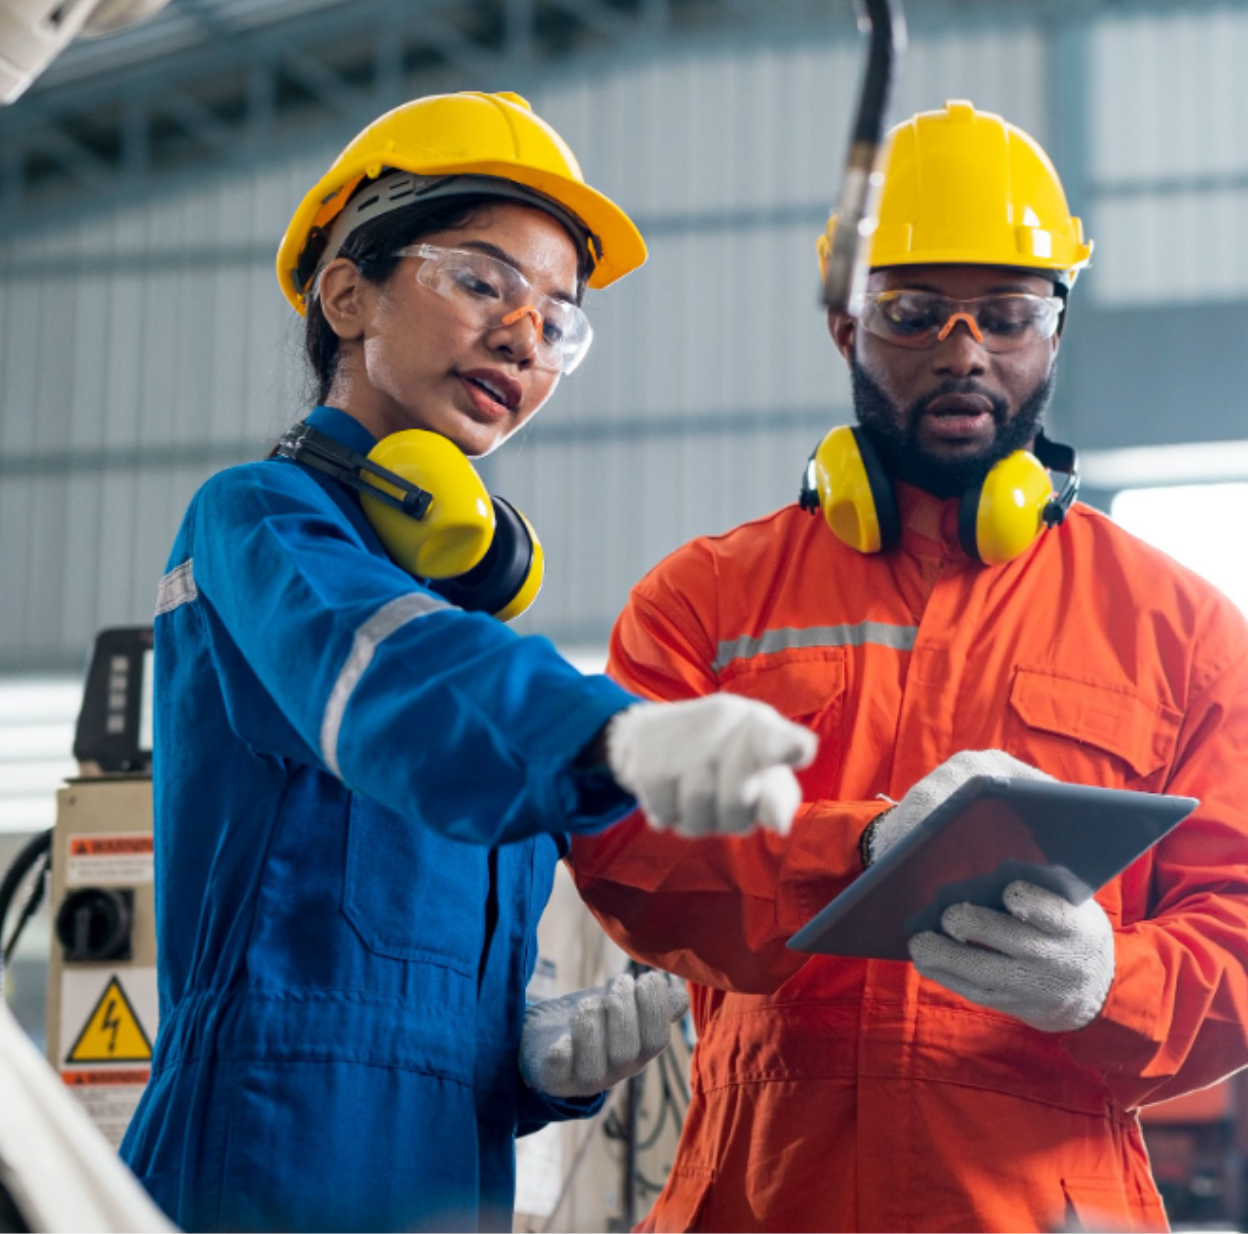 Unlock the full potential of your manufacturing workforce